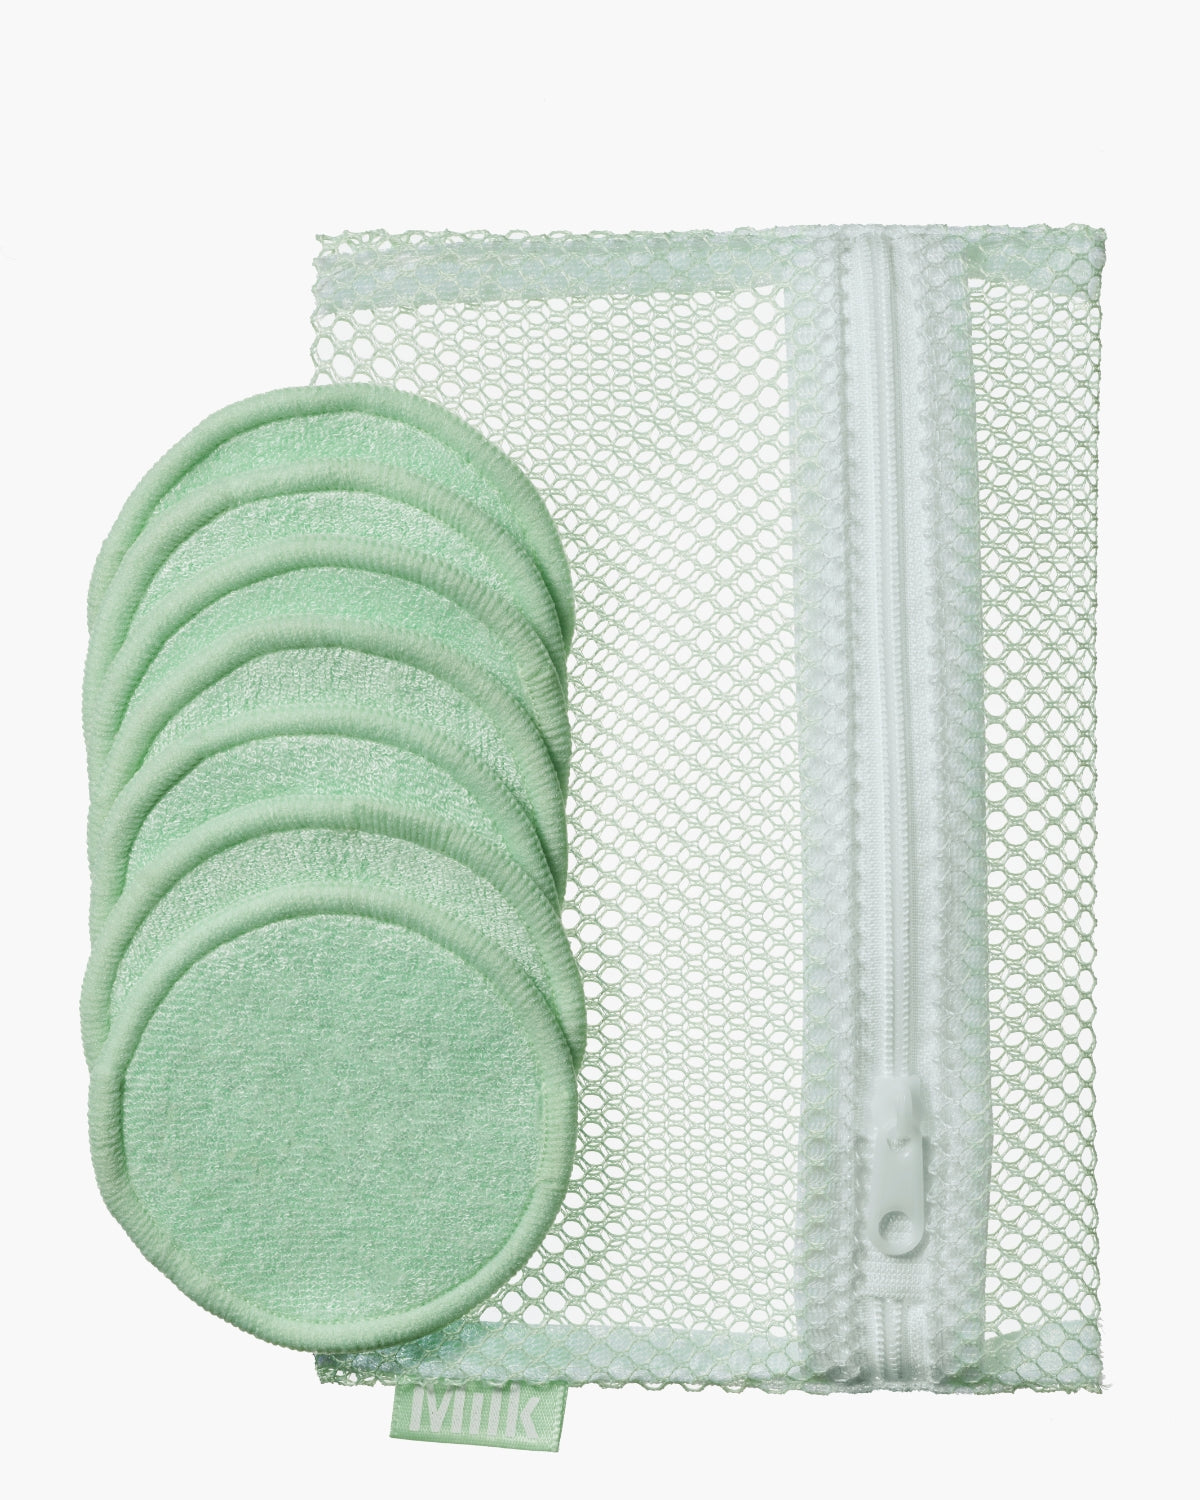 10 Reusable Makeup Remover Pads That Are Easy to Clean